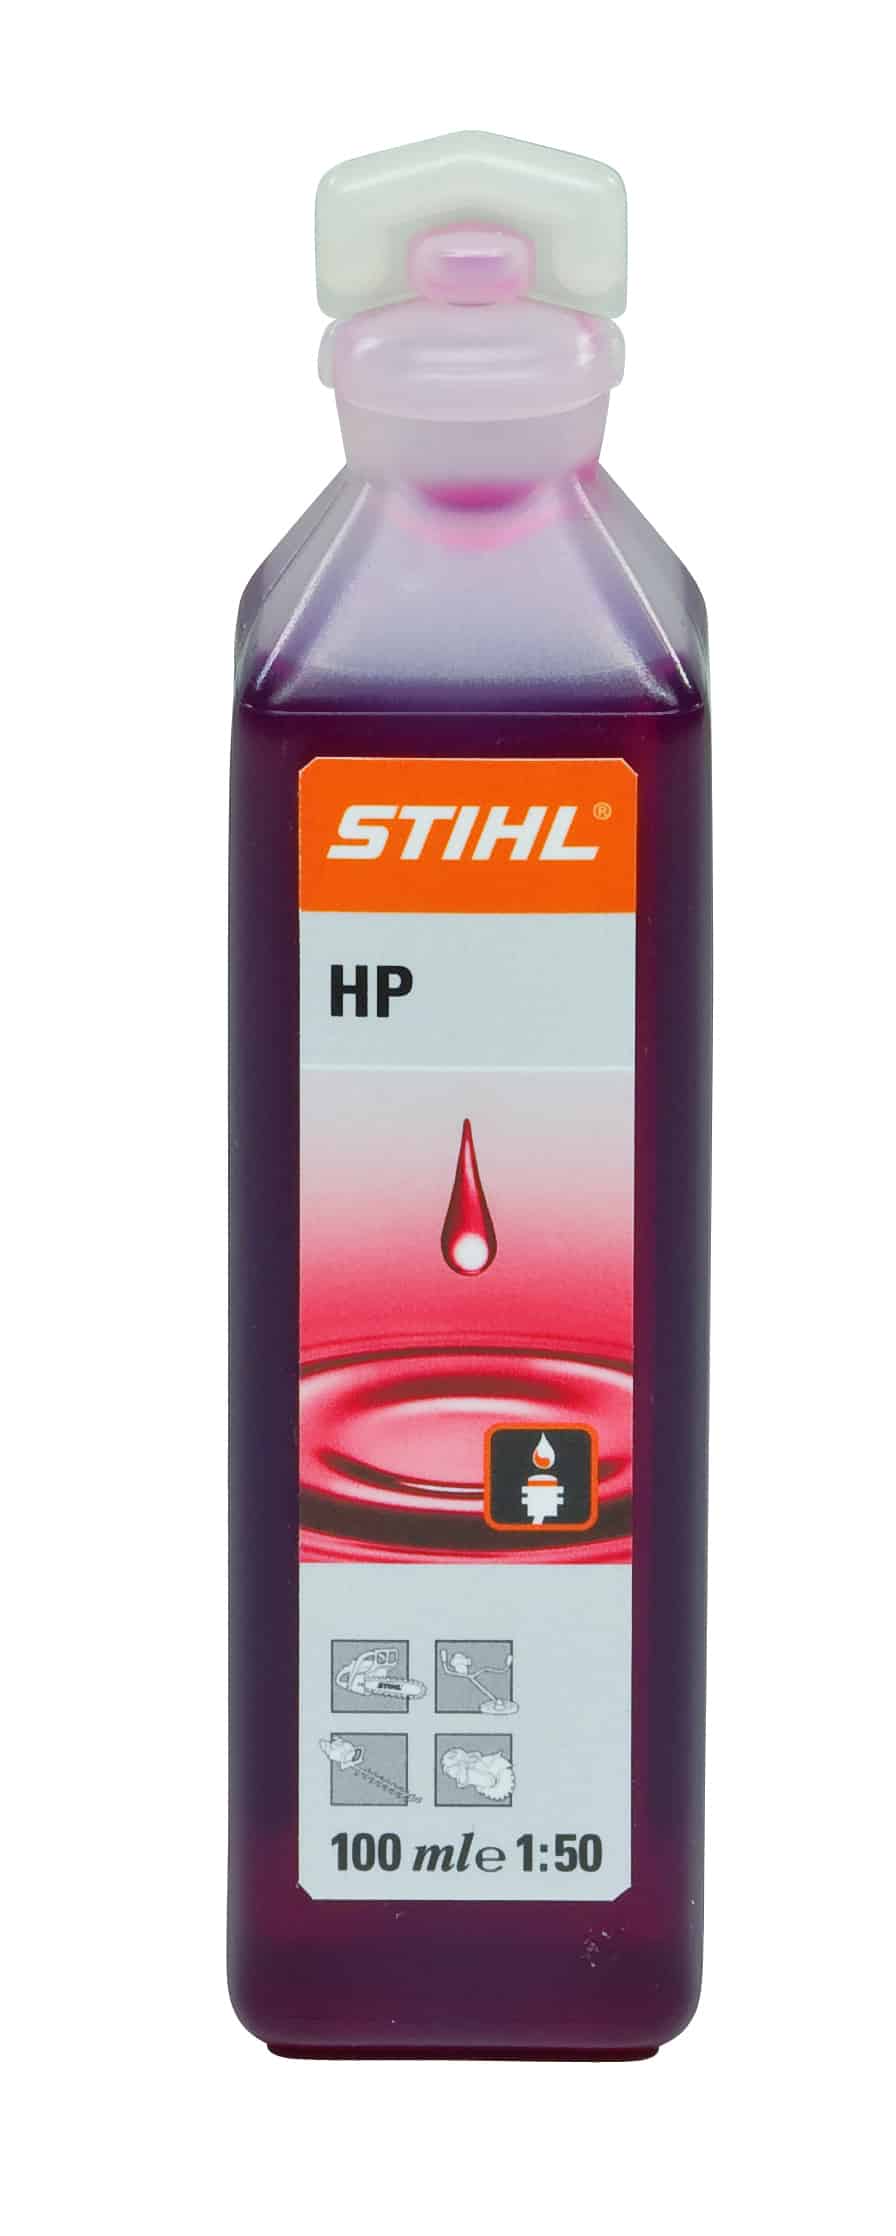 HP Two stroke engine oil one-shot